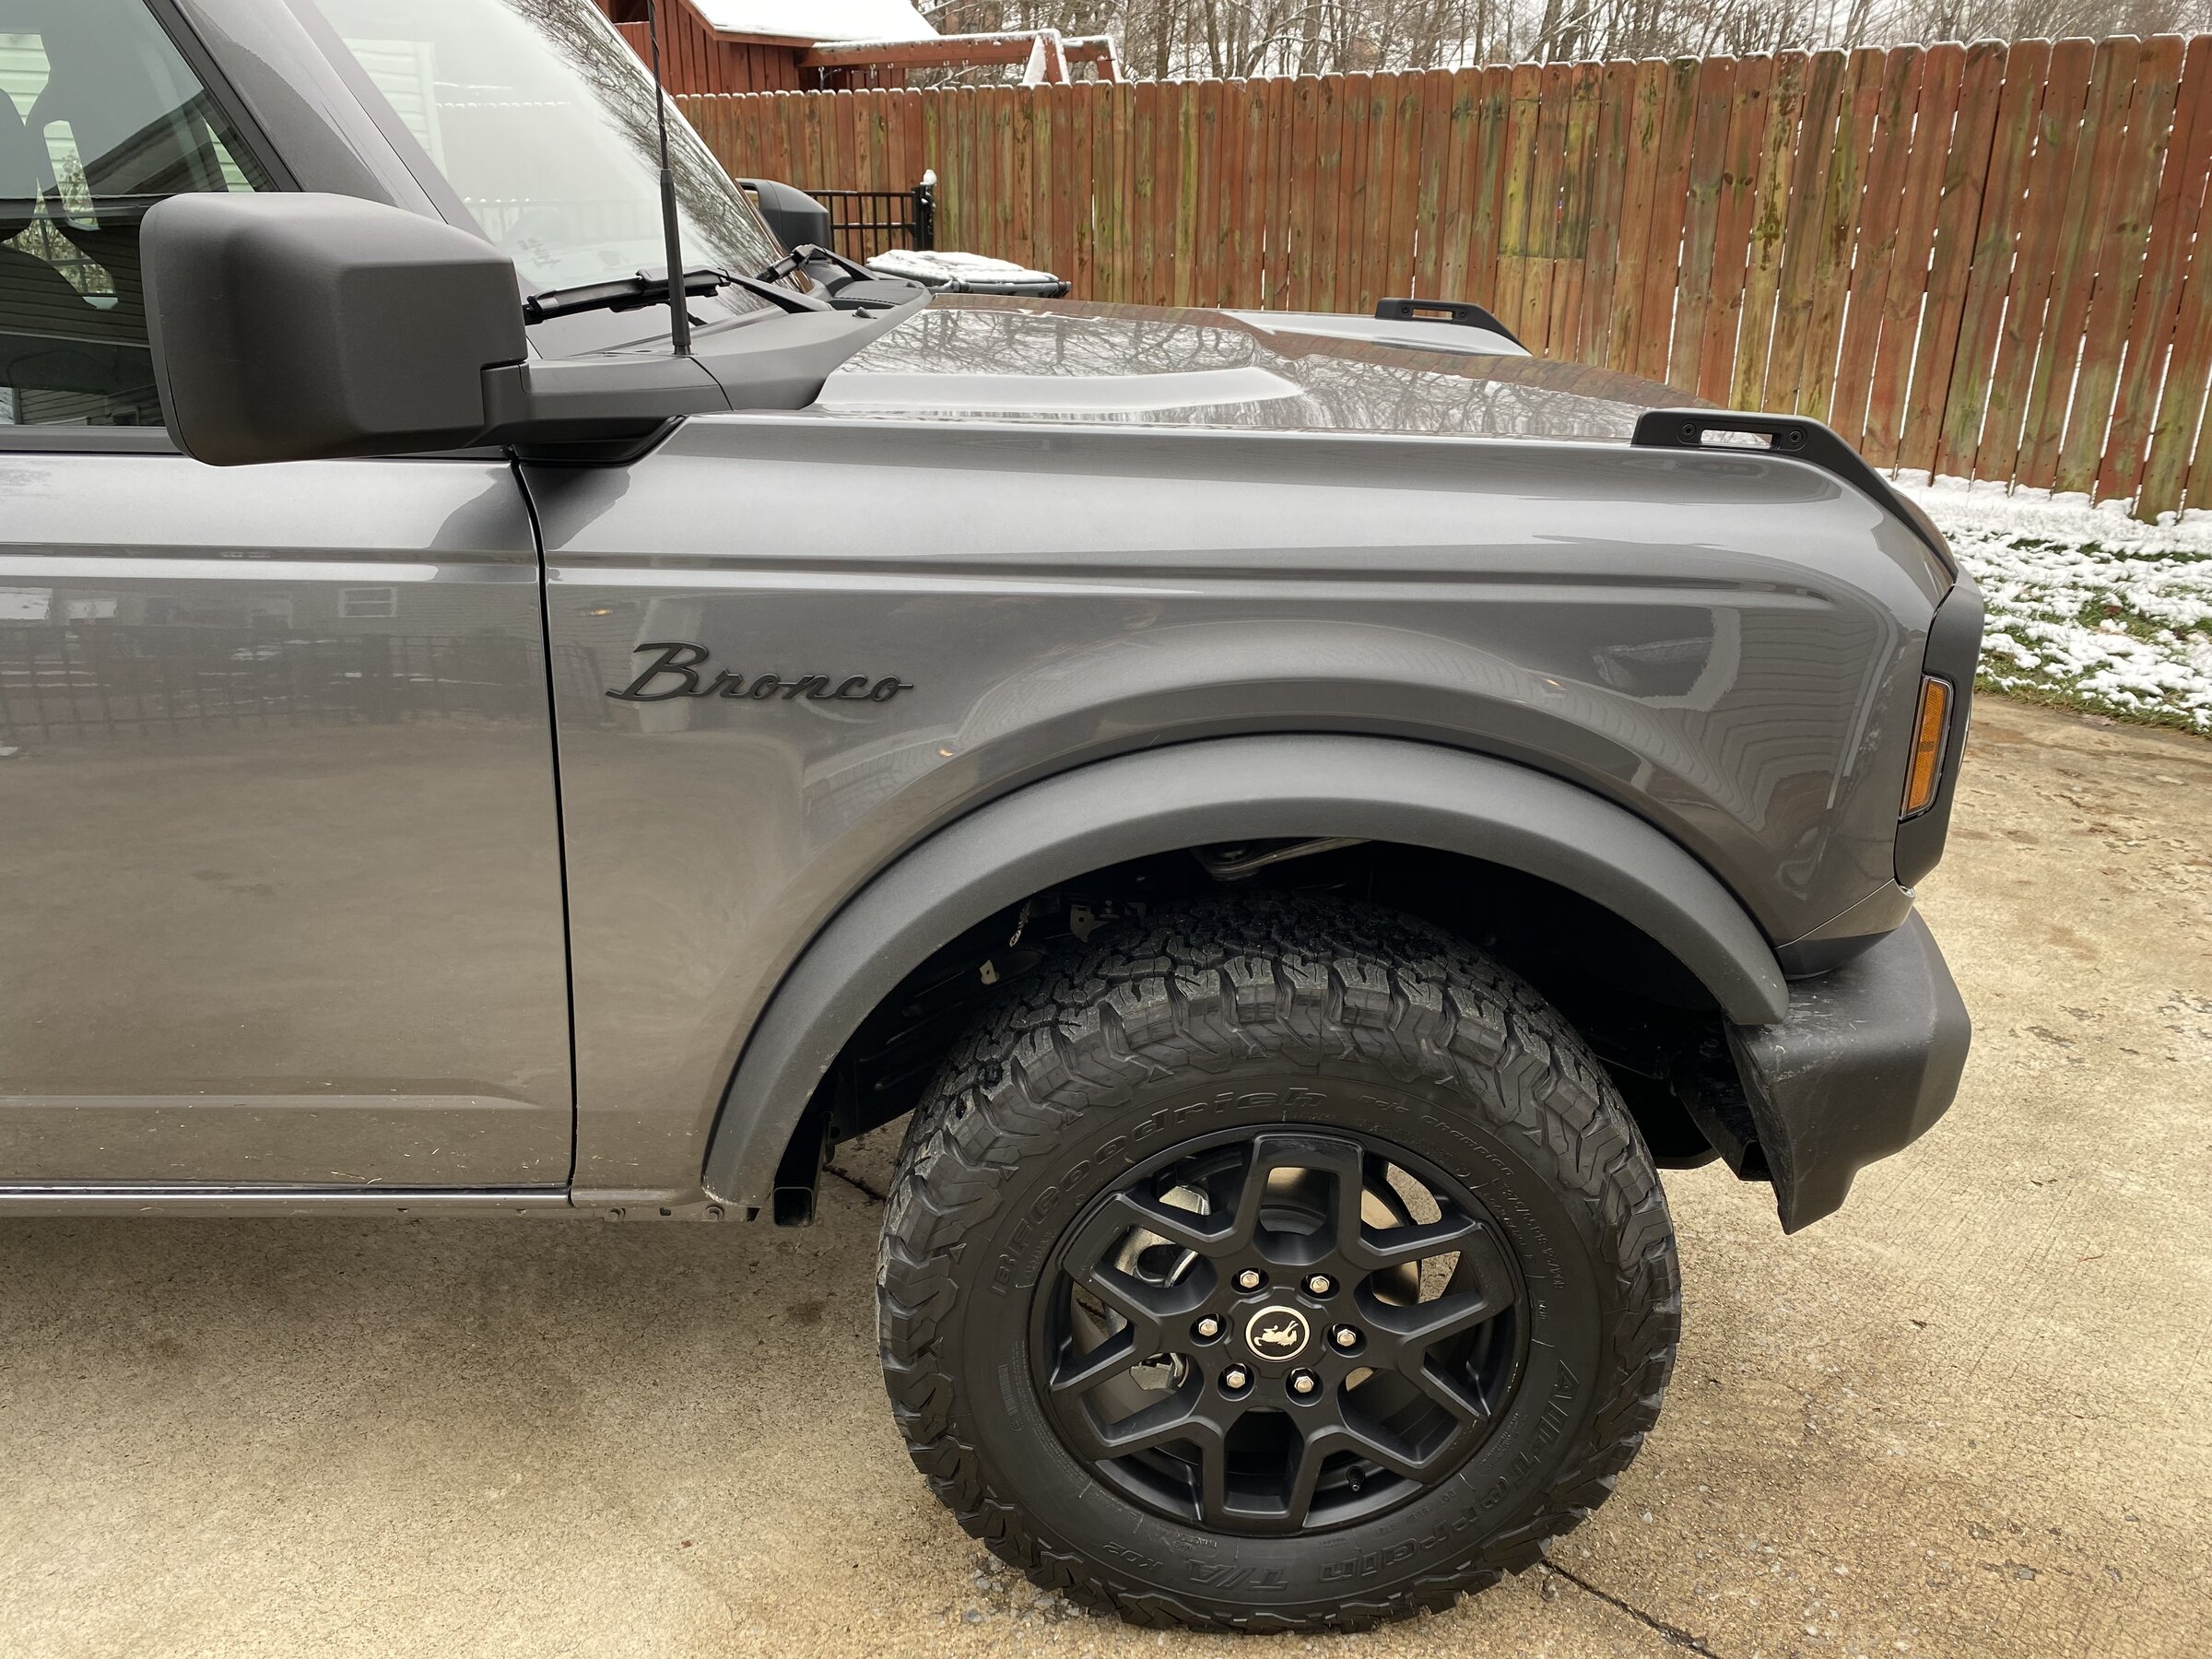 Ford Bronco Sexier Wheels and Tires for my non-Sas OBX? 88B23A75-DC39-46CC-8BB4-44605E24C1D8